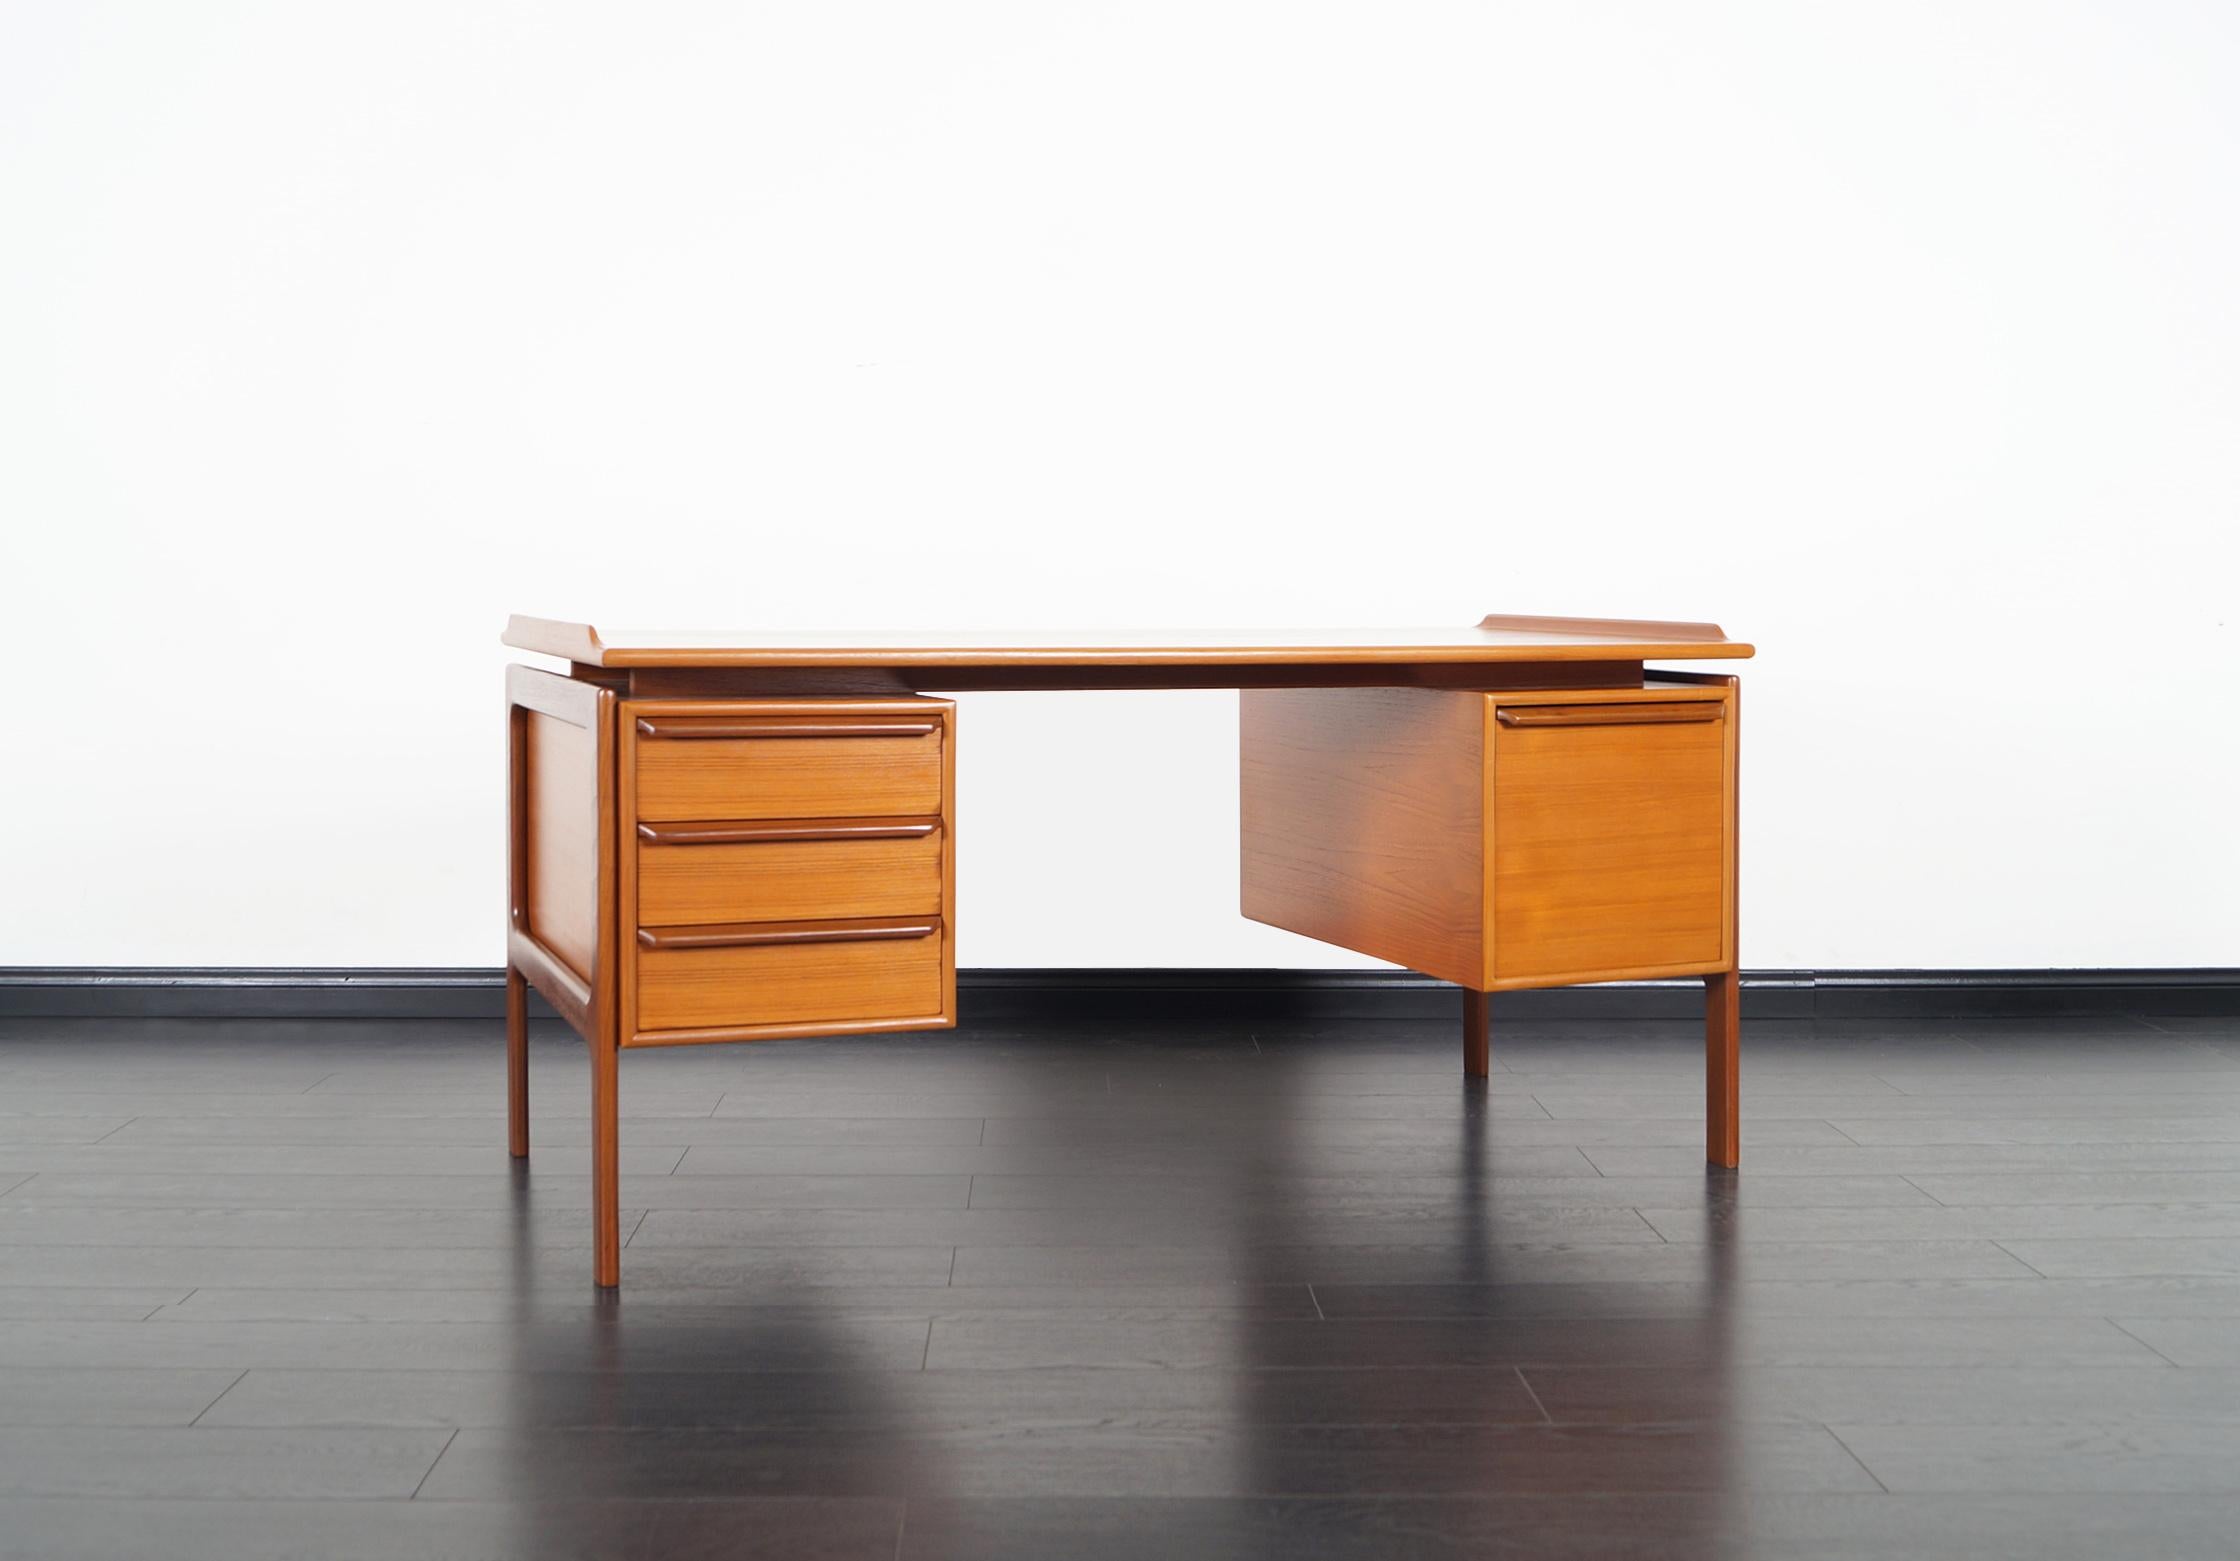 Danish modern teak desk manufactured by G.V. Møbler in Denmark, circa 1960s. The top has a floating top appearance. It features three drawers on the left and a file drawer on the right. Nice details are the dovetailed joints and clean lines.